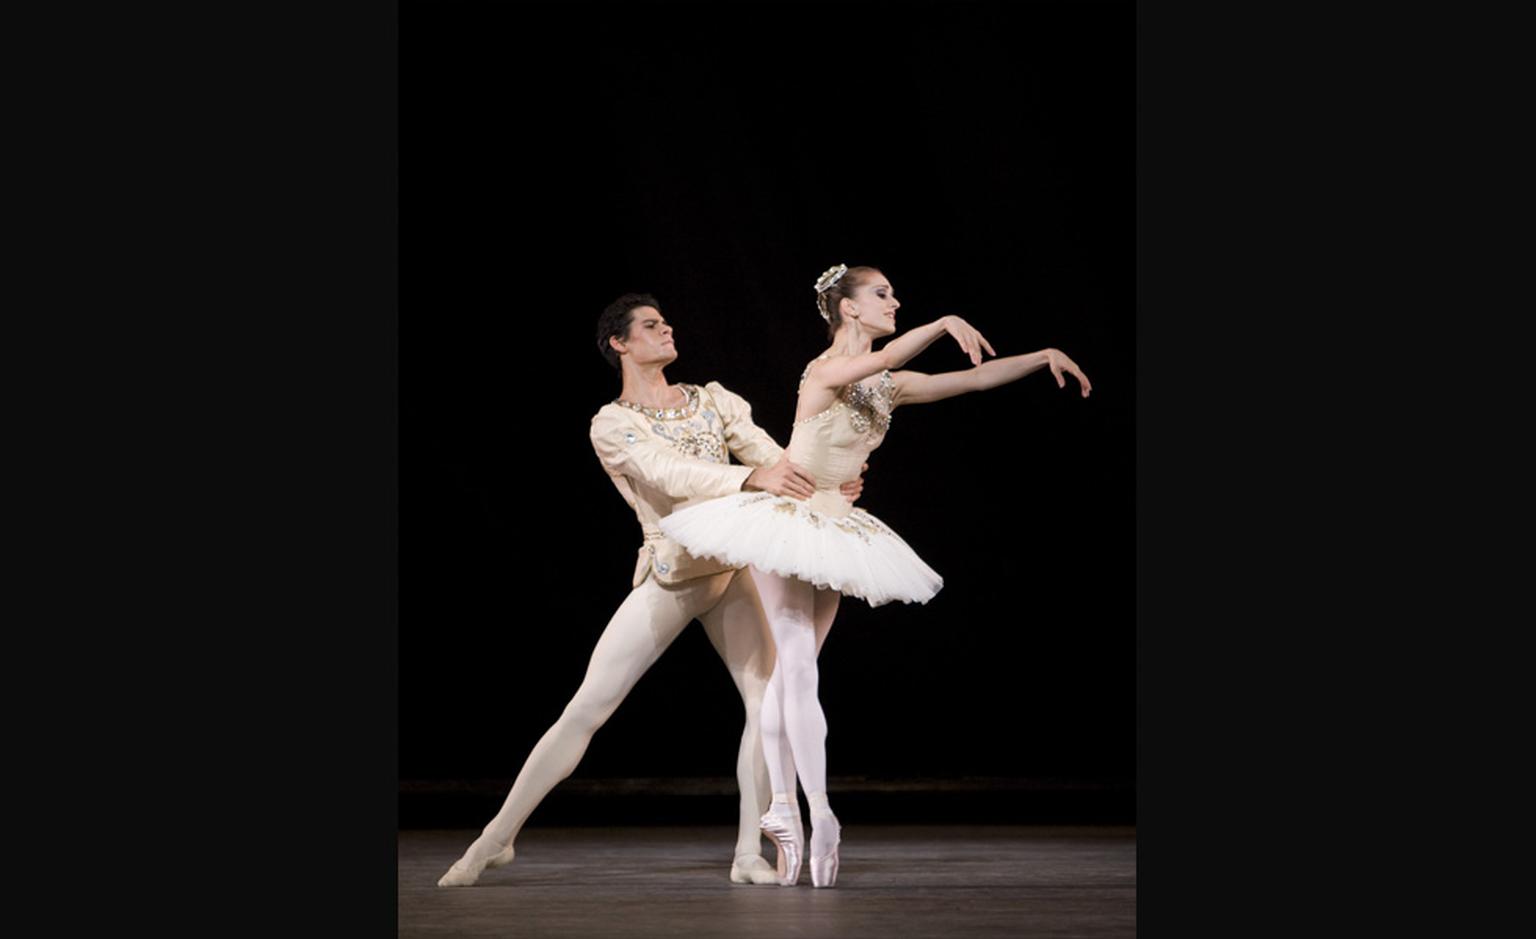 Thiago Soares and Marianela Nuñez in Diamonds as part of Jewels. Photo Johan Persson